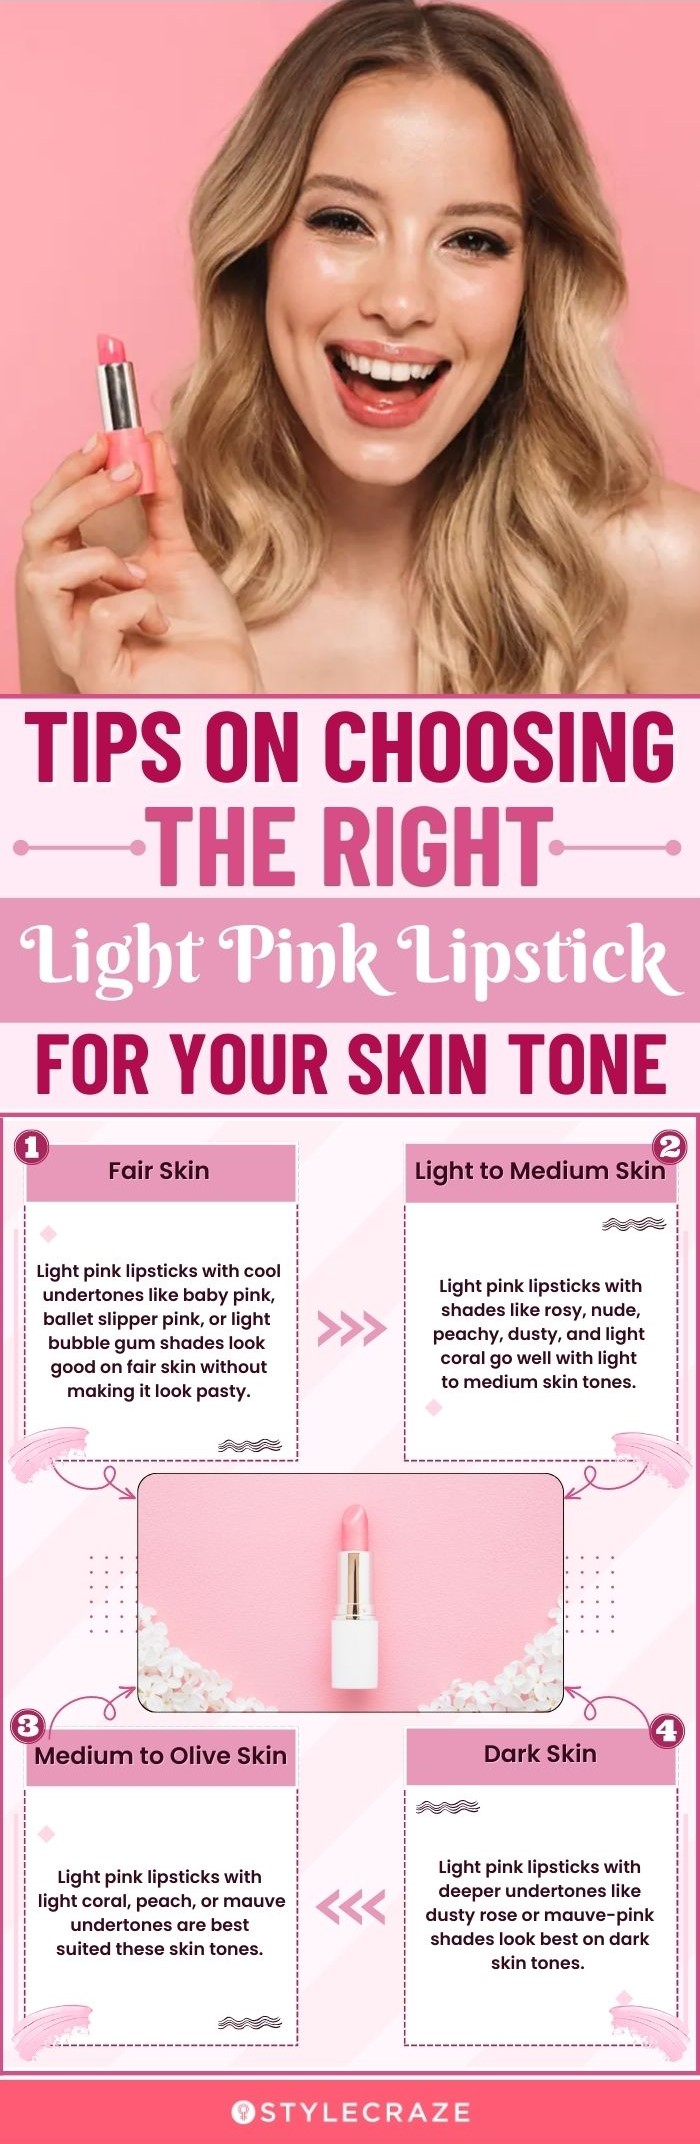 Tips On Choosing The Right Light Pink Lipstick For Your Skin Tone (infographic)